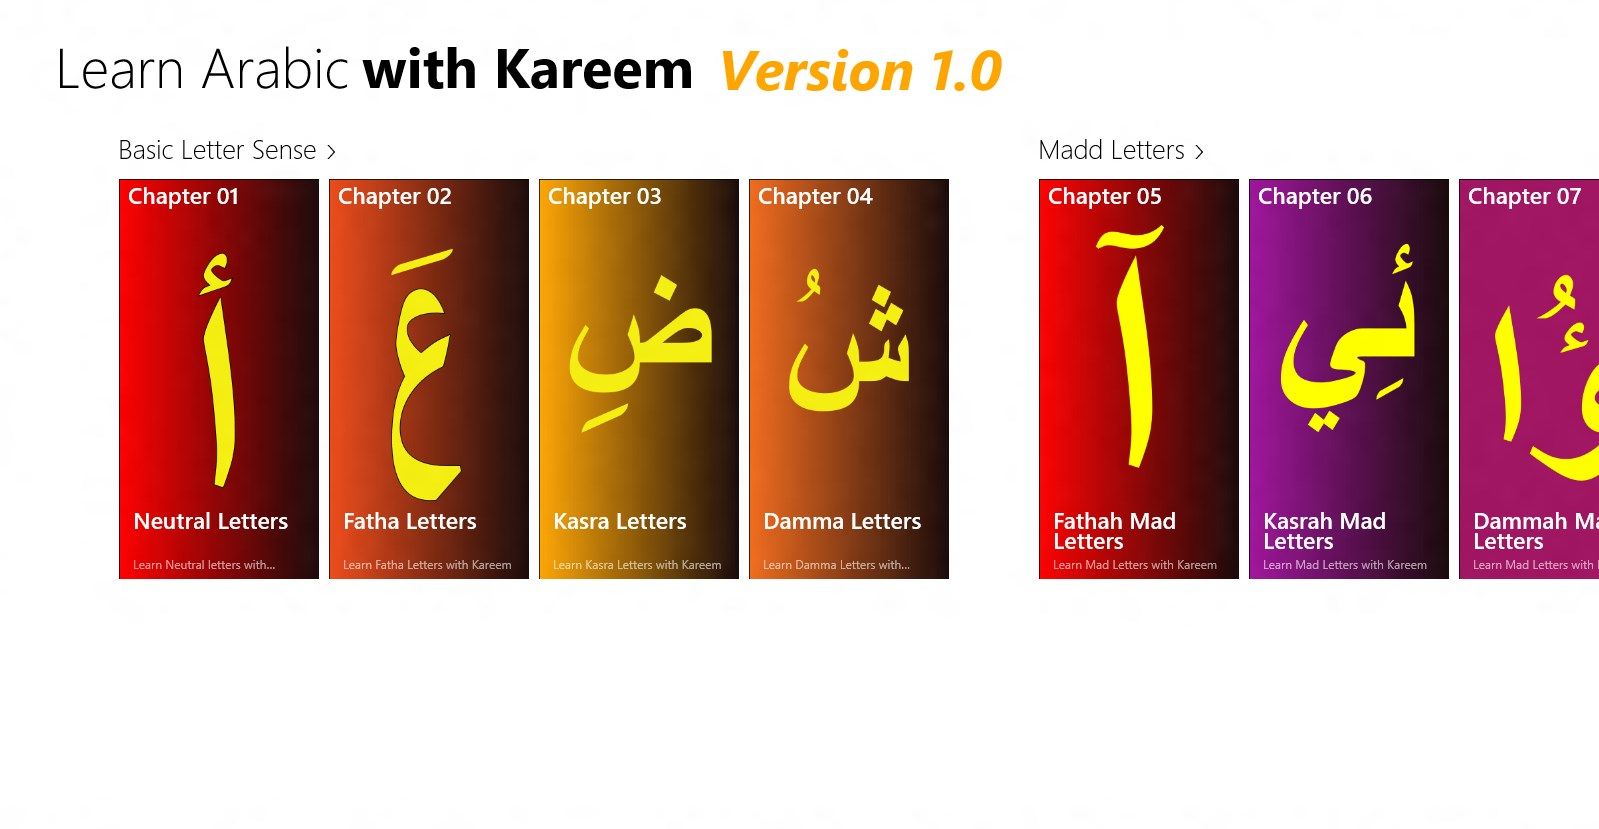 Learn Arabic using a series of chapter lessons. Each chapter contains 4 to 24 lessons.